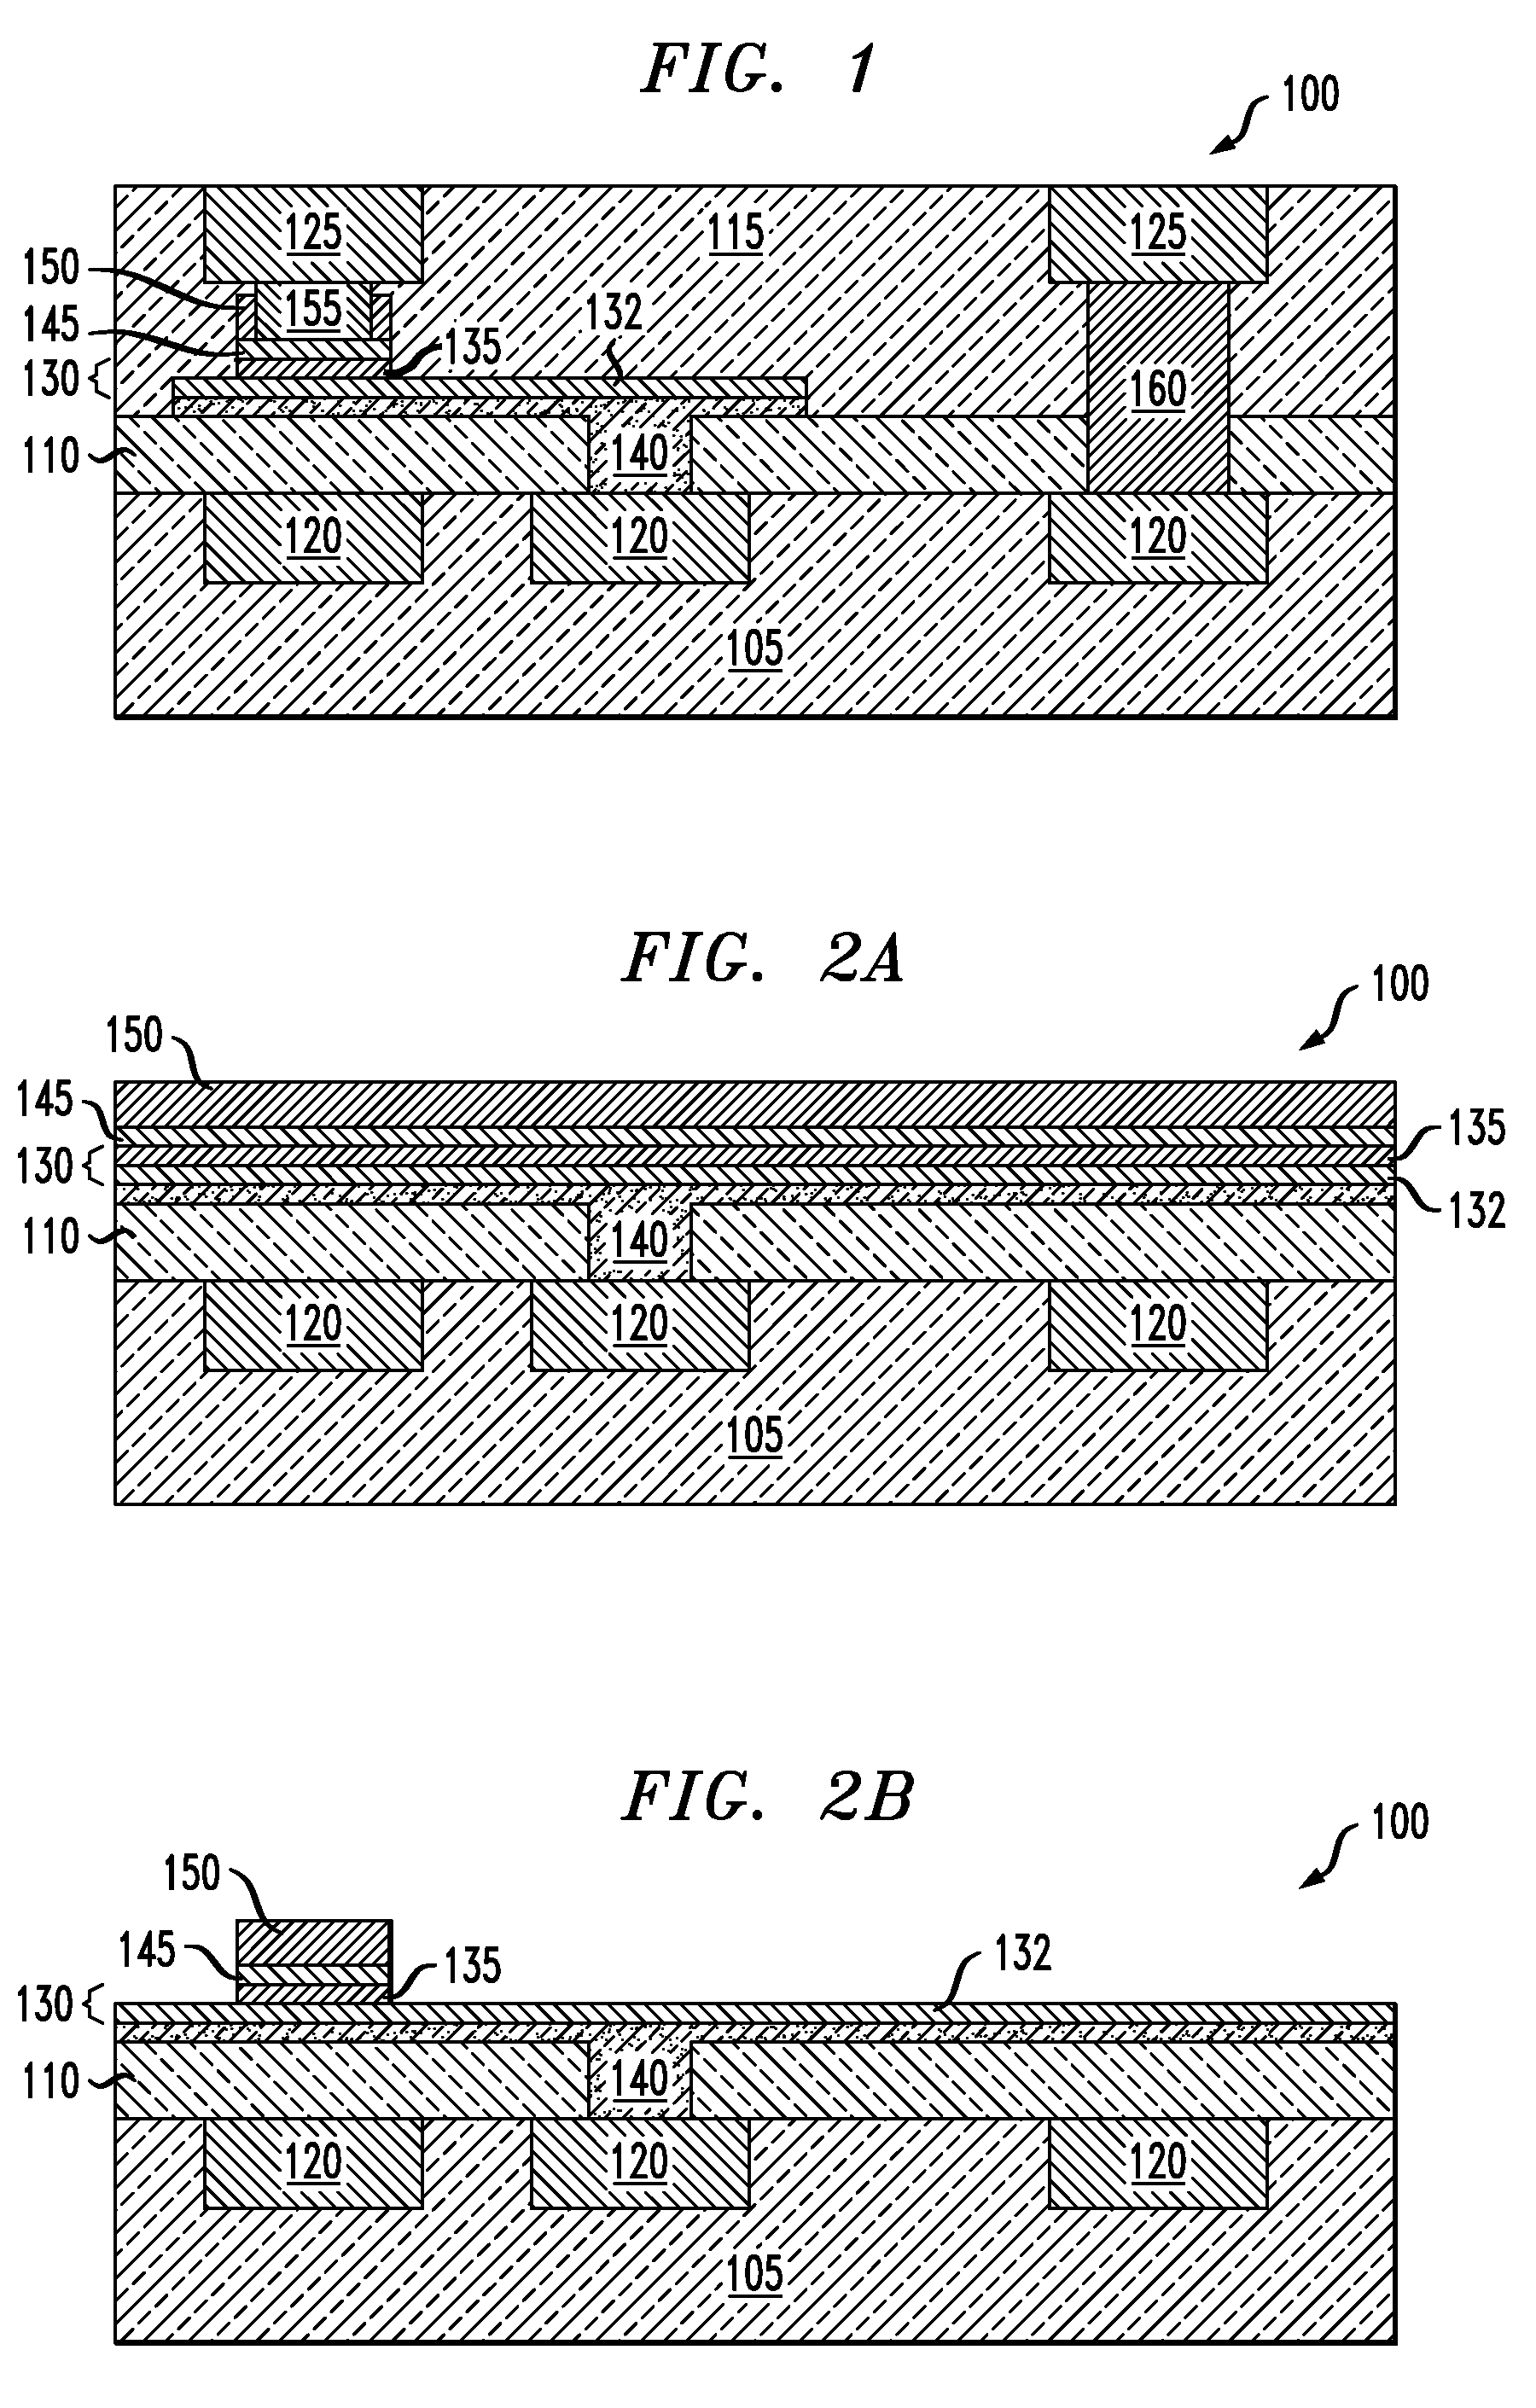 Method of Forming Vertical Contacts in Integrated Circuits